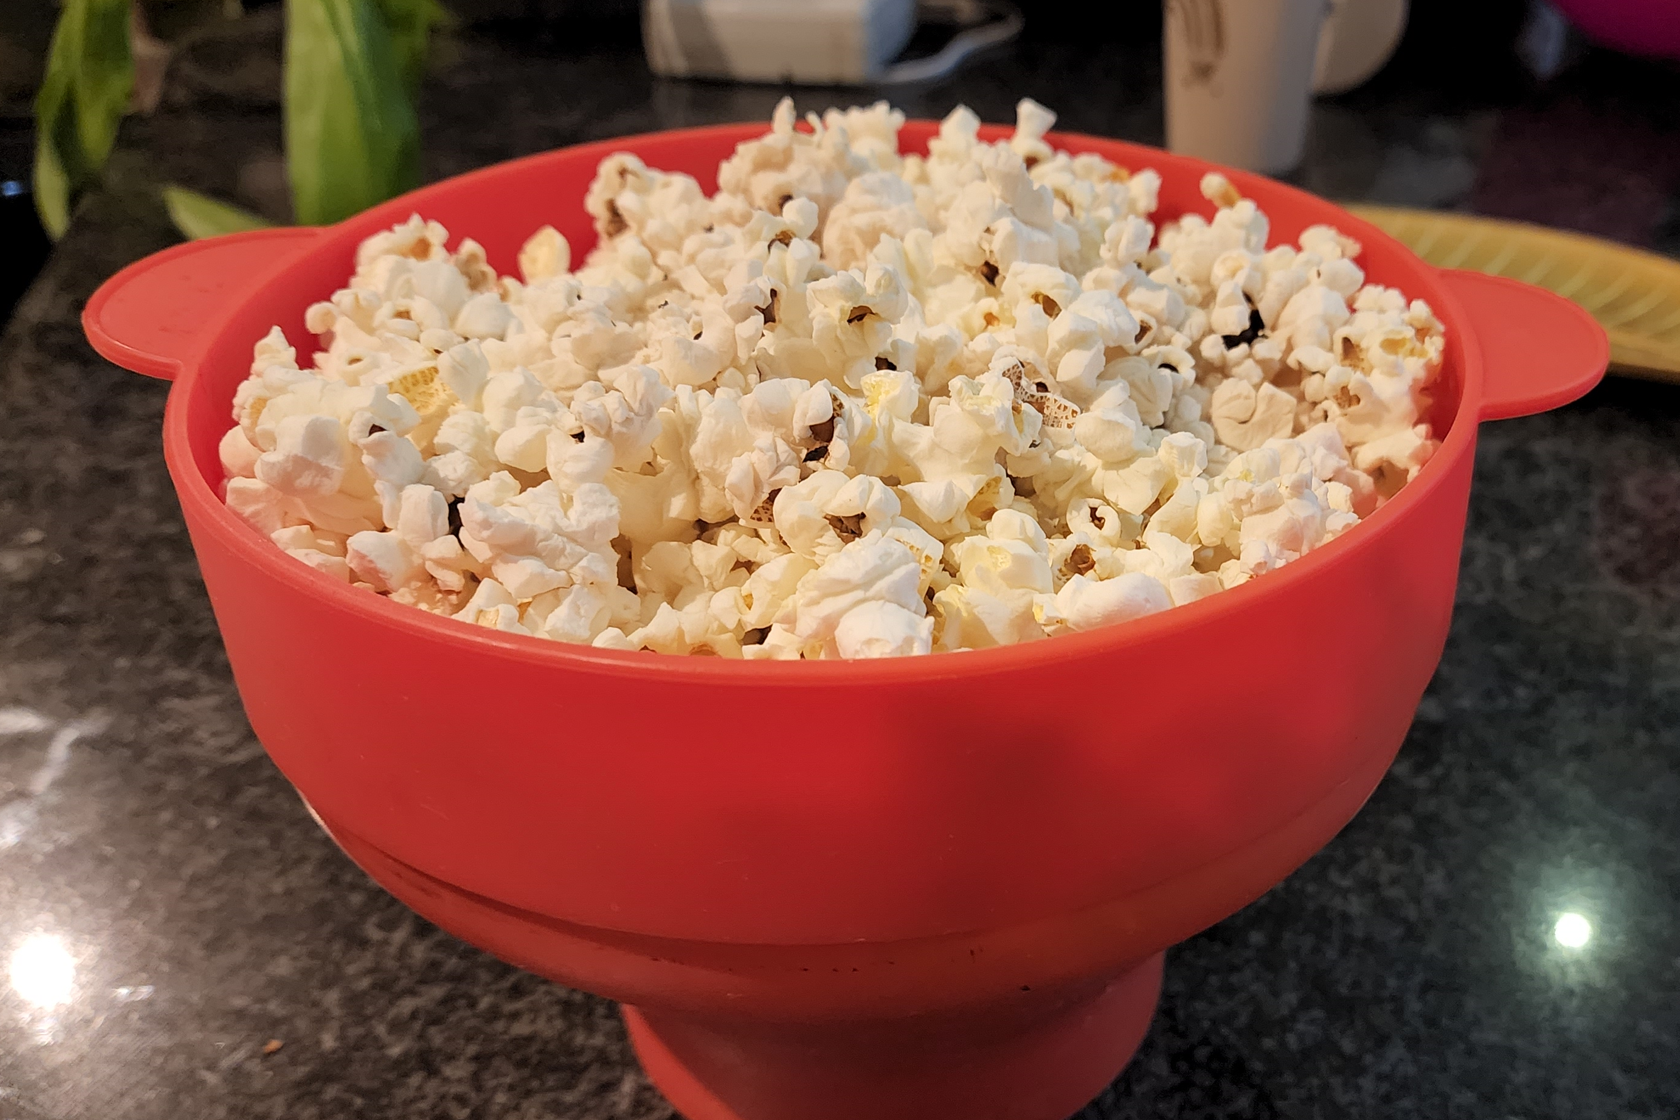 Our Point of View on Popco Silicone Microwave Popcorn Popper From